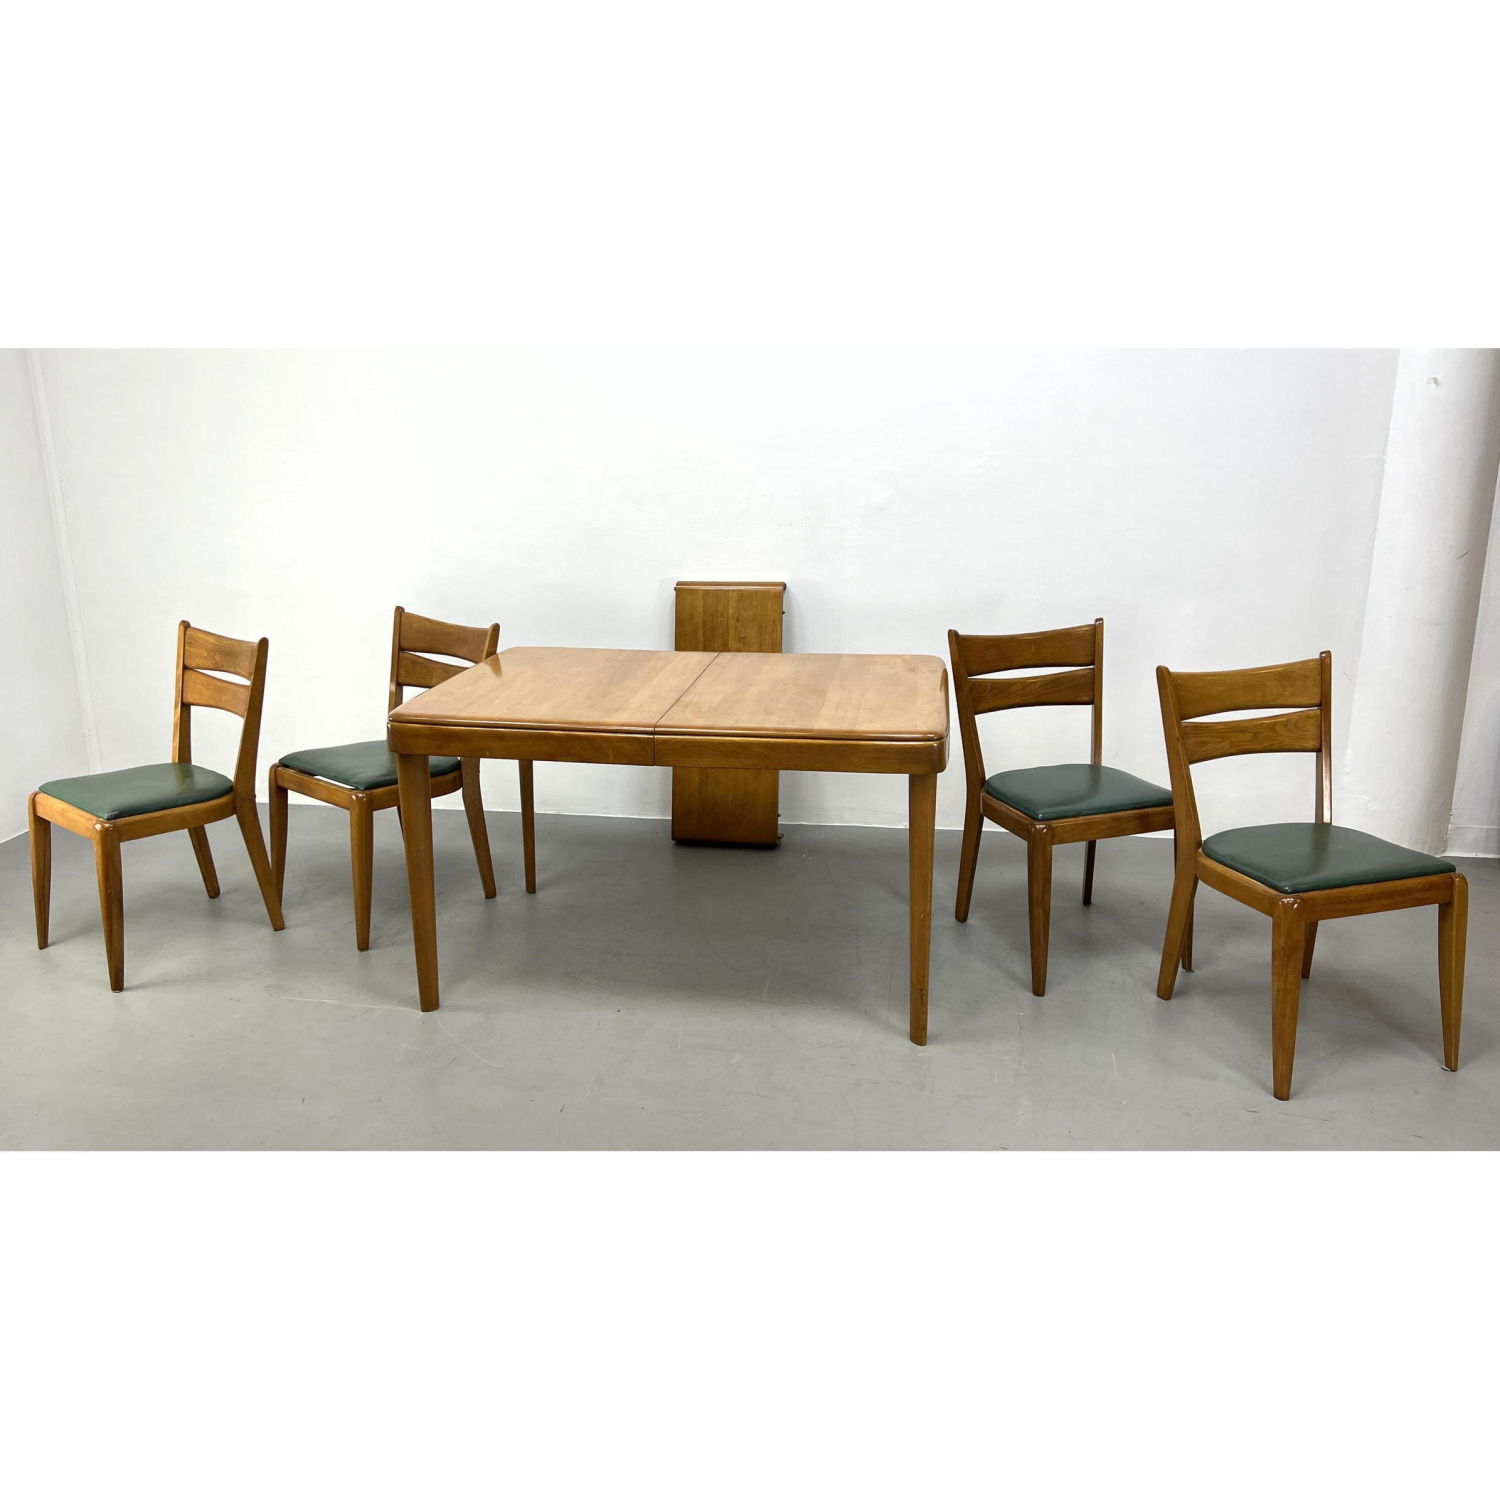 5pc Heywood Wakefield dining table 2b9d95